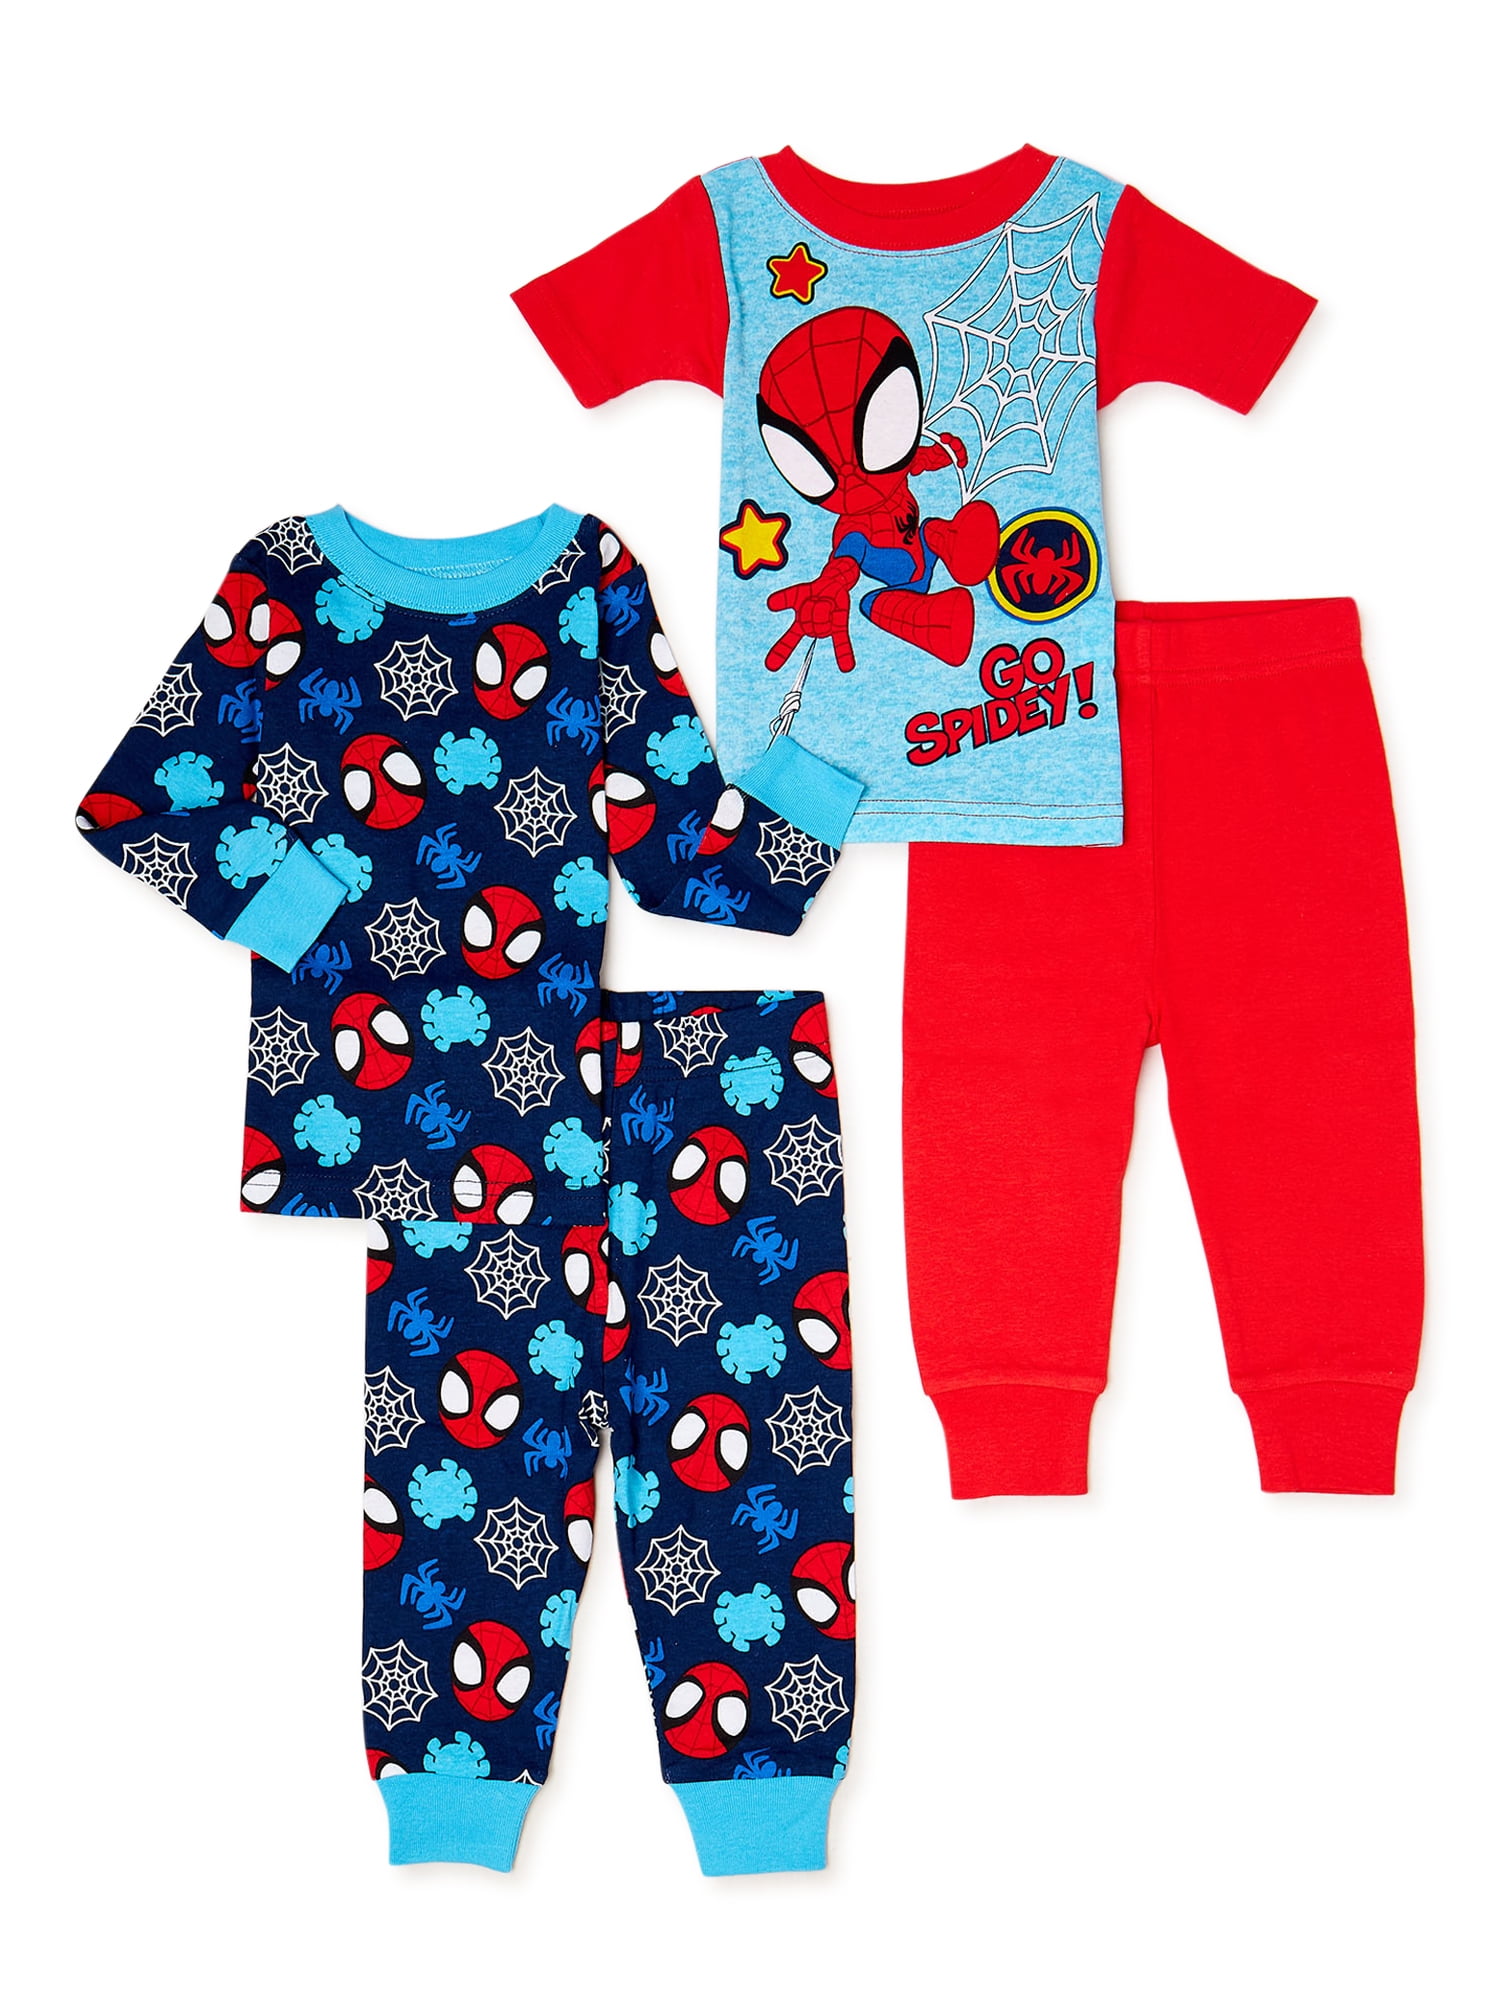 Details about   Infant Toddler Boys Spiderman Red Top Blue Bottom Pajamas Size 12M 24M 